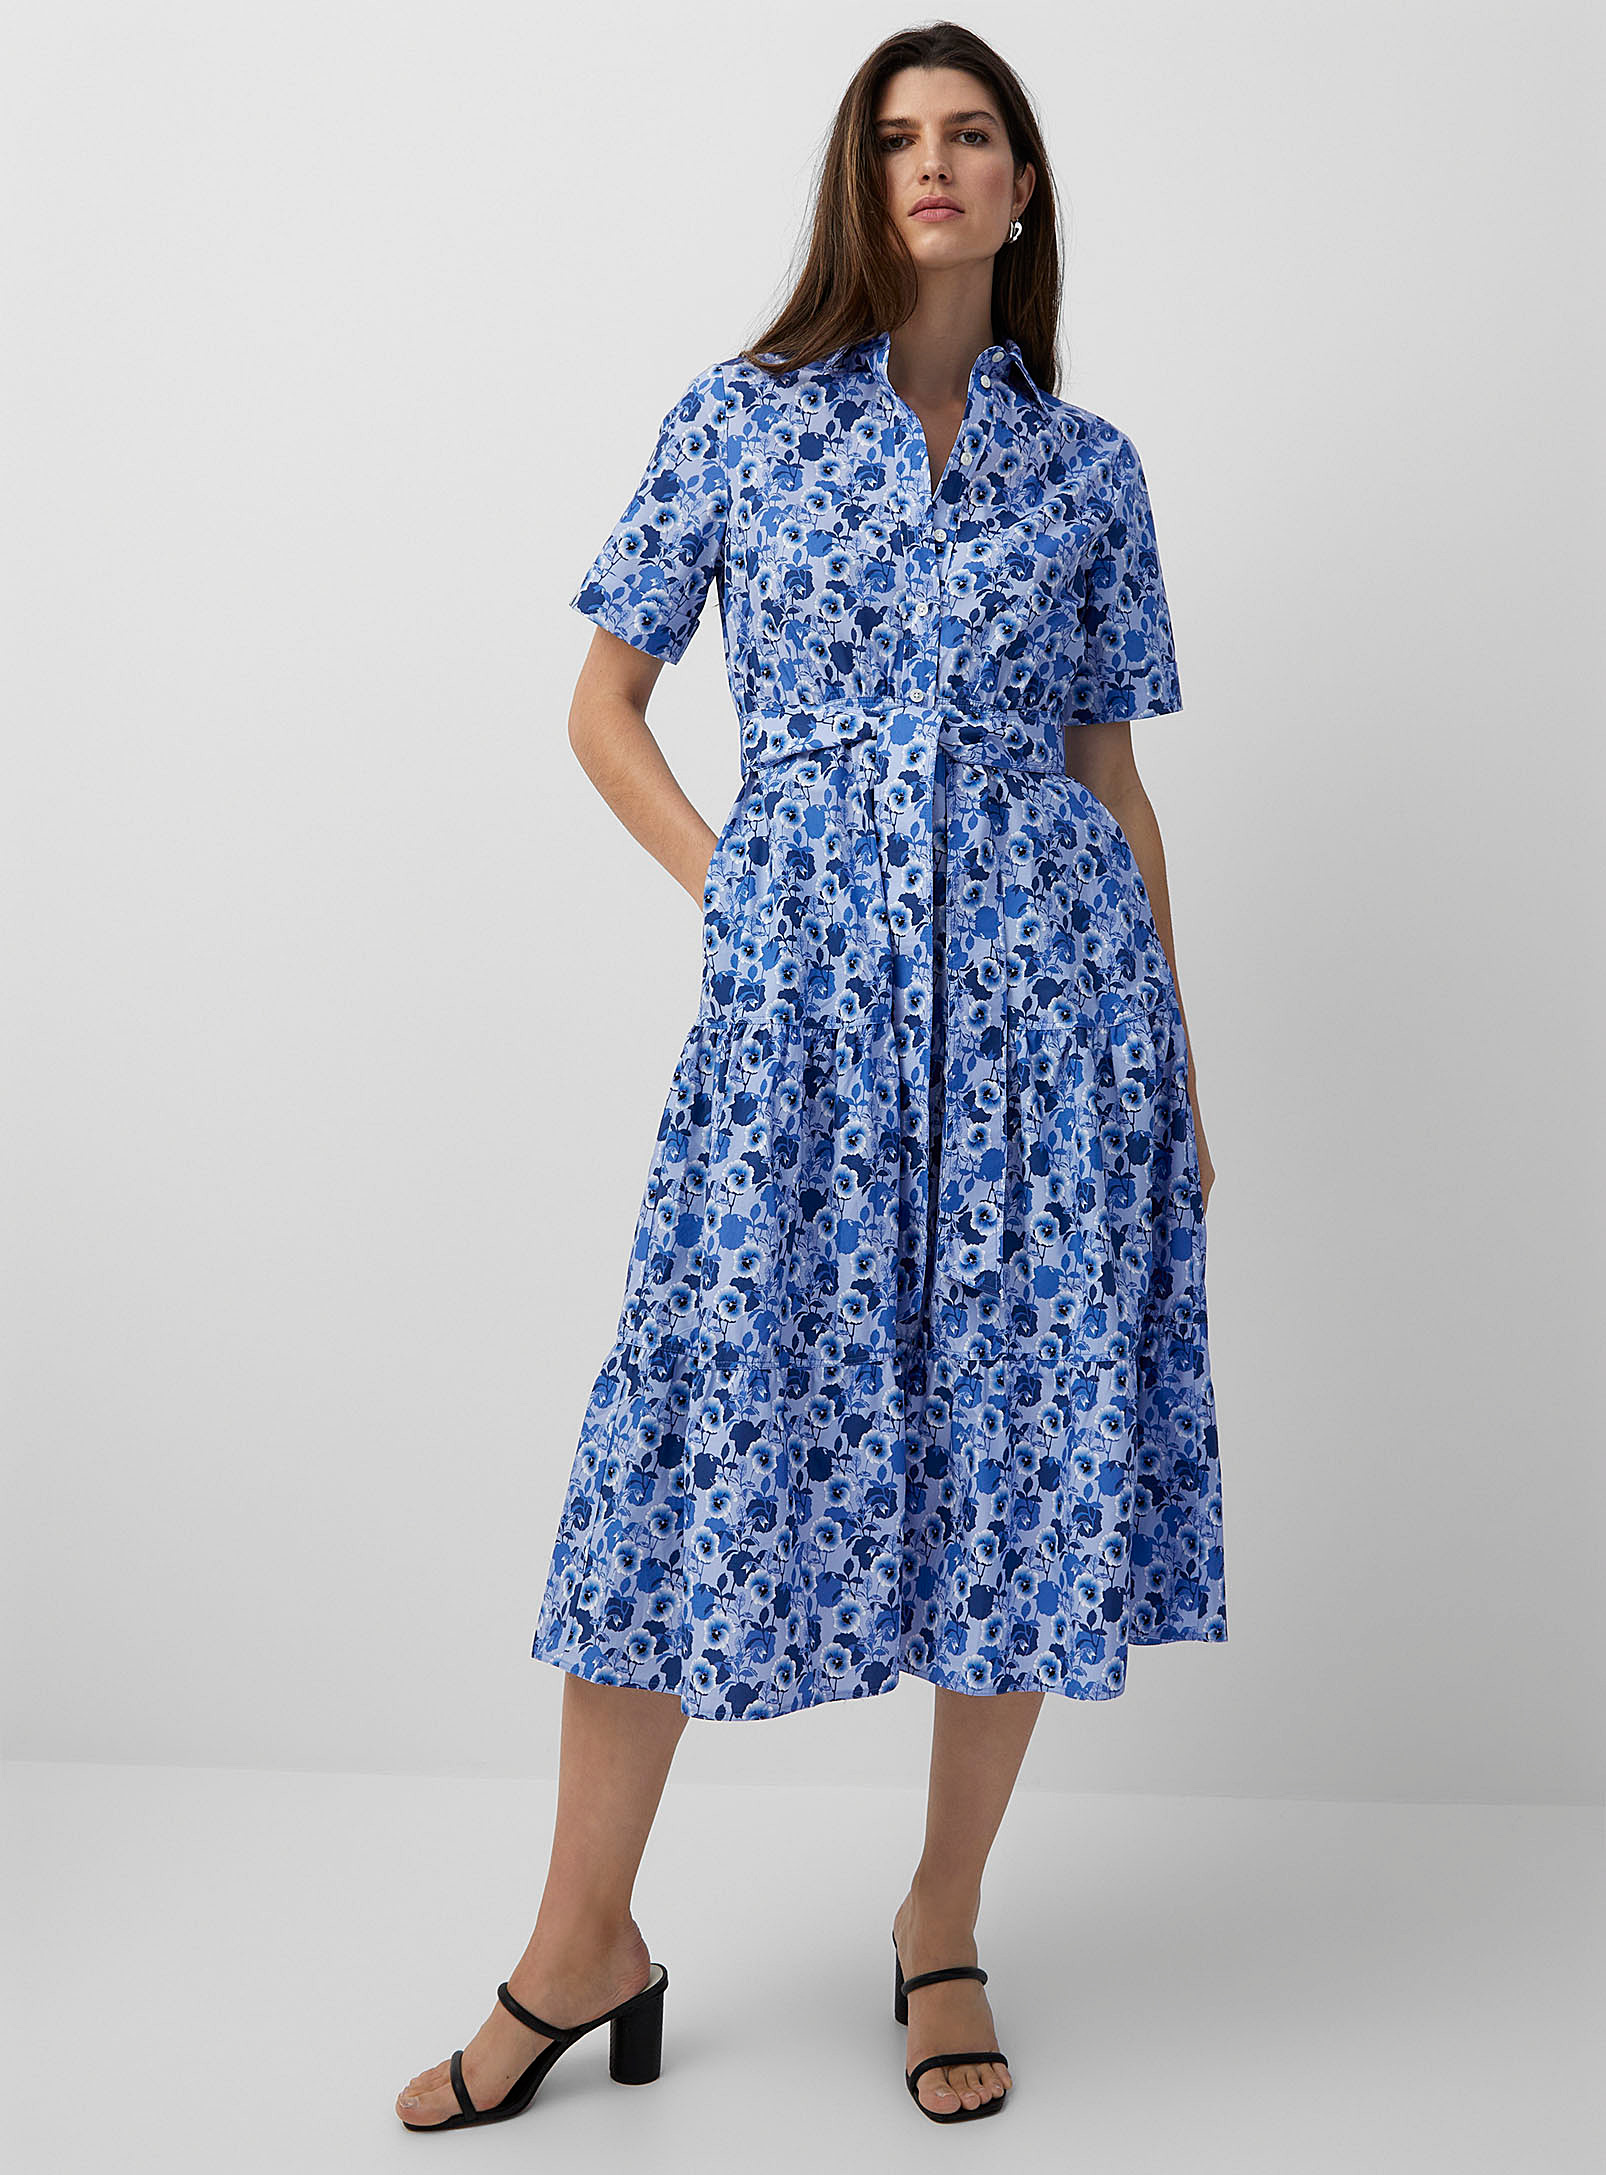 Contemporaine Sumptuous Bouquet Shirtdress Made With Liberty Fabric In Patterned Blue